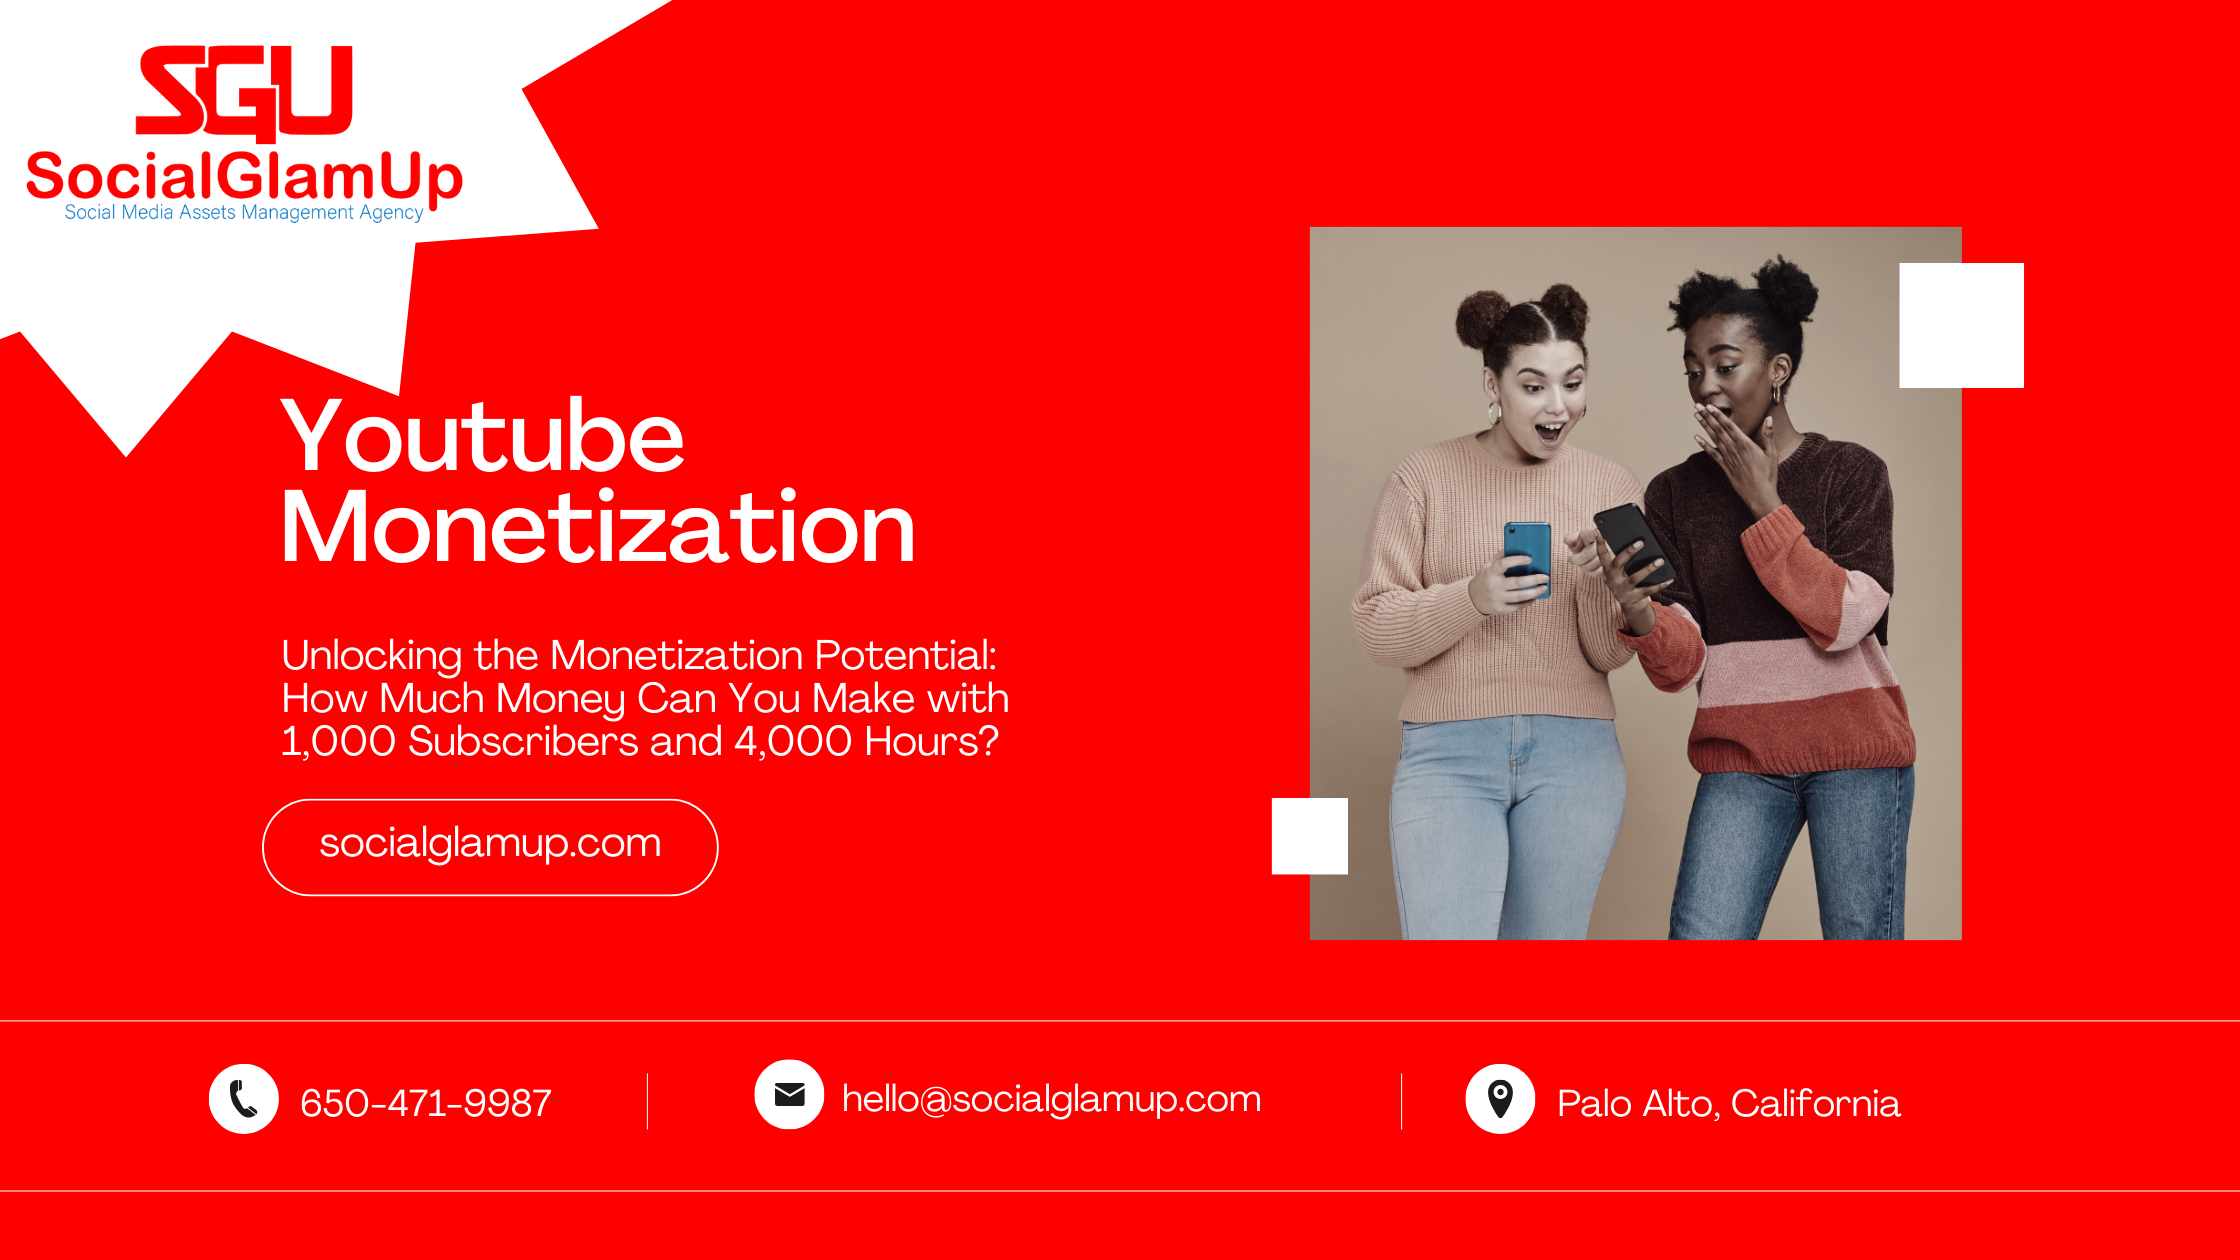 Want to grow your YouTube channel to 1,000 subscribers and 4,000 hours? Use SocialGlamUp! We're a social media growth service that can help you get more views, subscribers, and engagement on your videos. With SocialGlamUp, you can earn an estimated $100 per month once you reach these milestones.